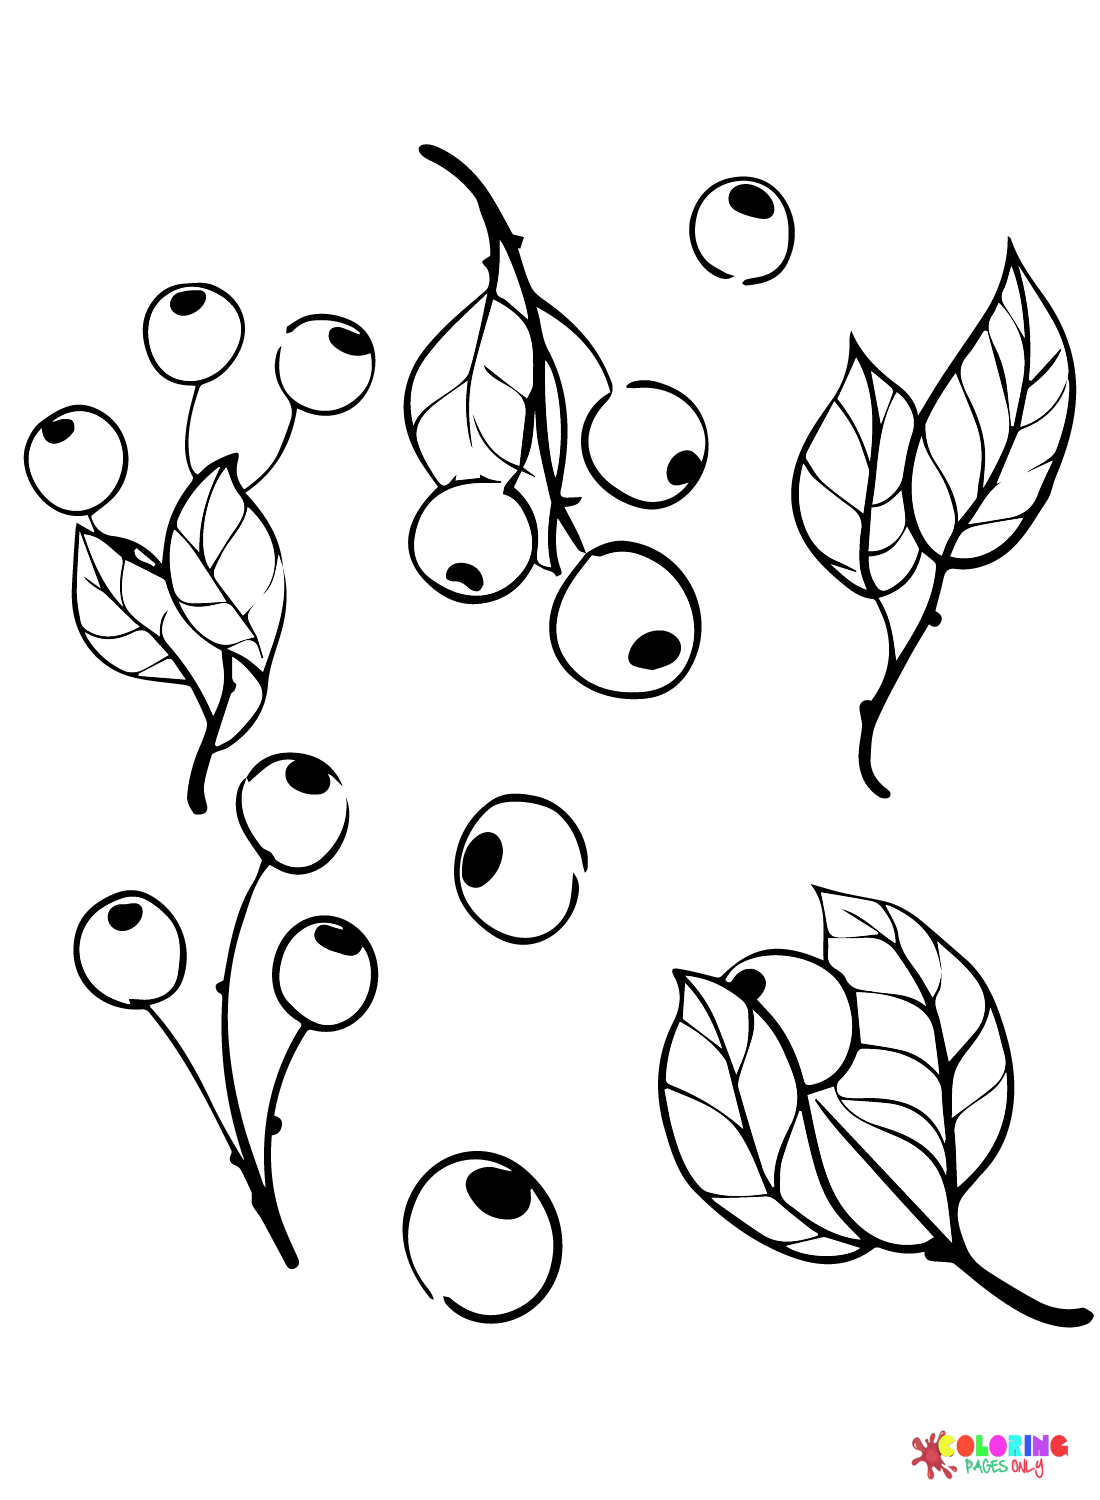 Blueberry Images Coloring Page